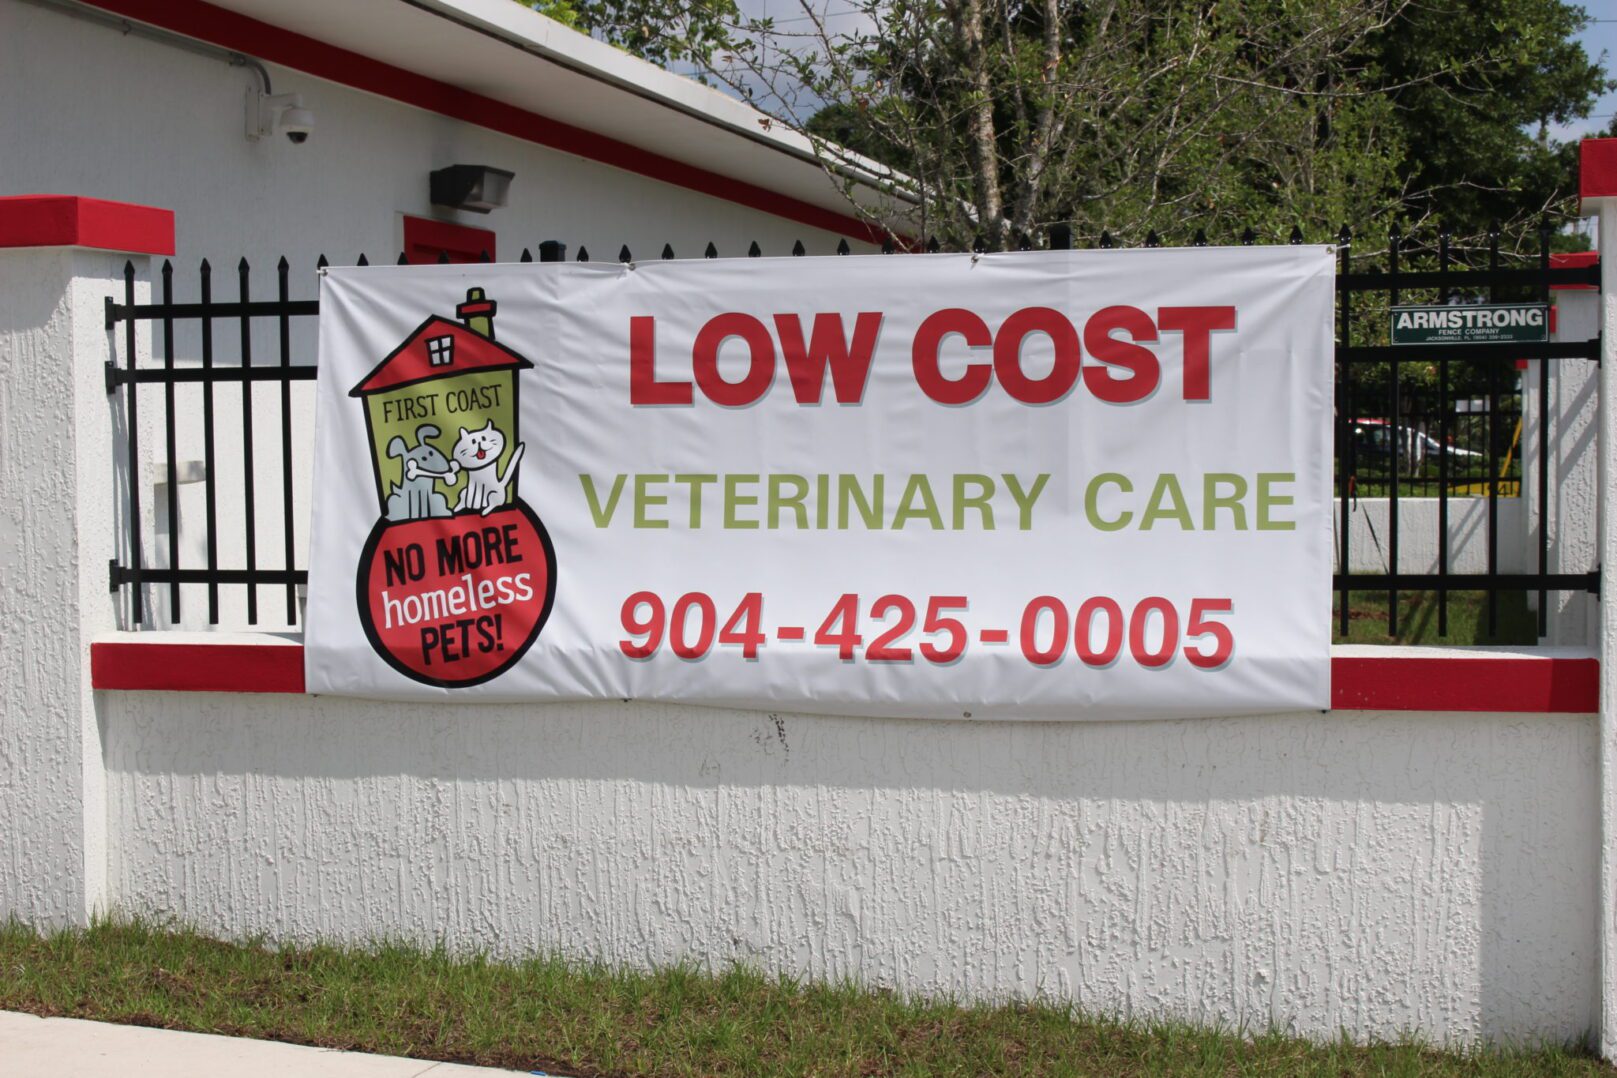 Our New Veterinary Hospital - First Coast No More Homeless Pets